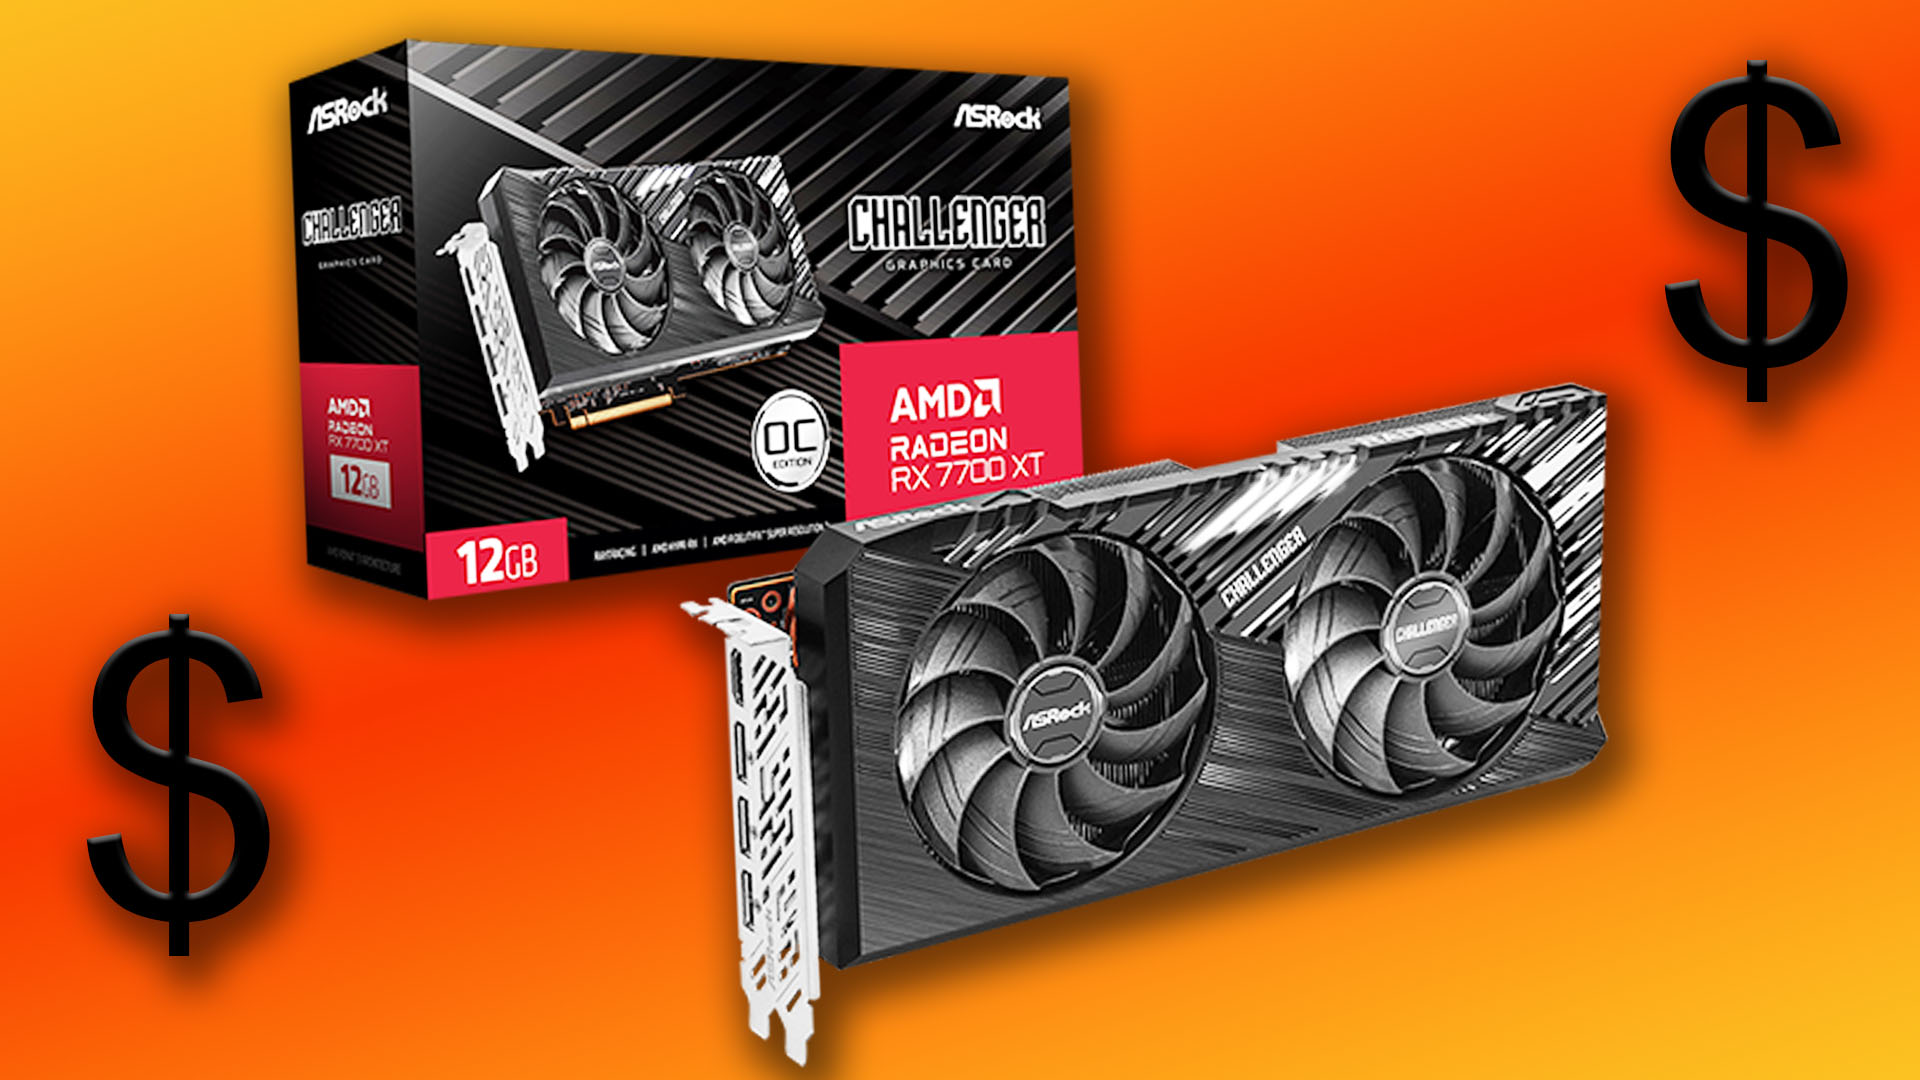 AMD's Radeon RX 7700 XT GPU is now at its lowest ever price